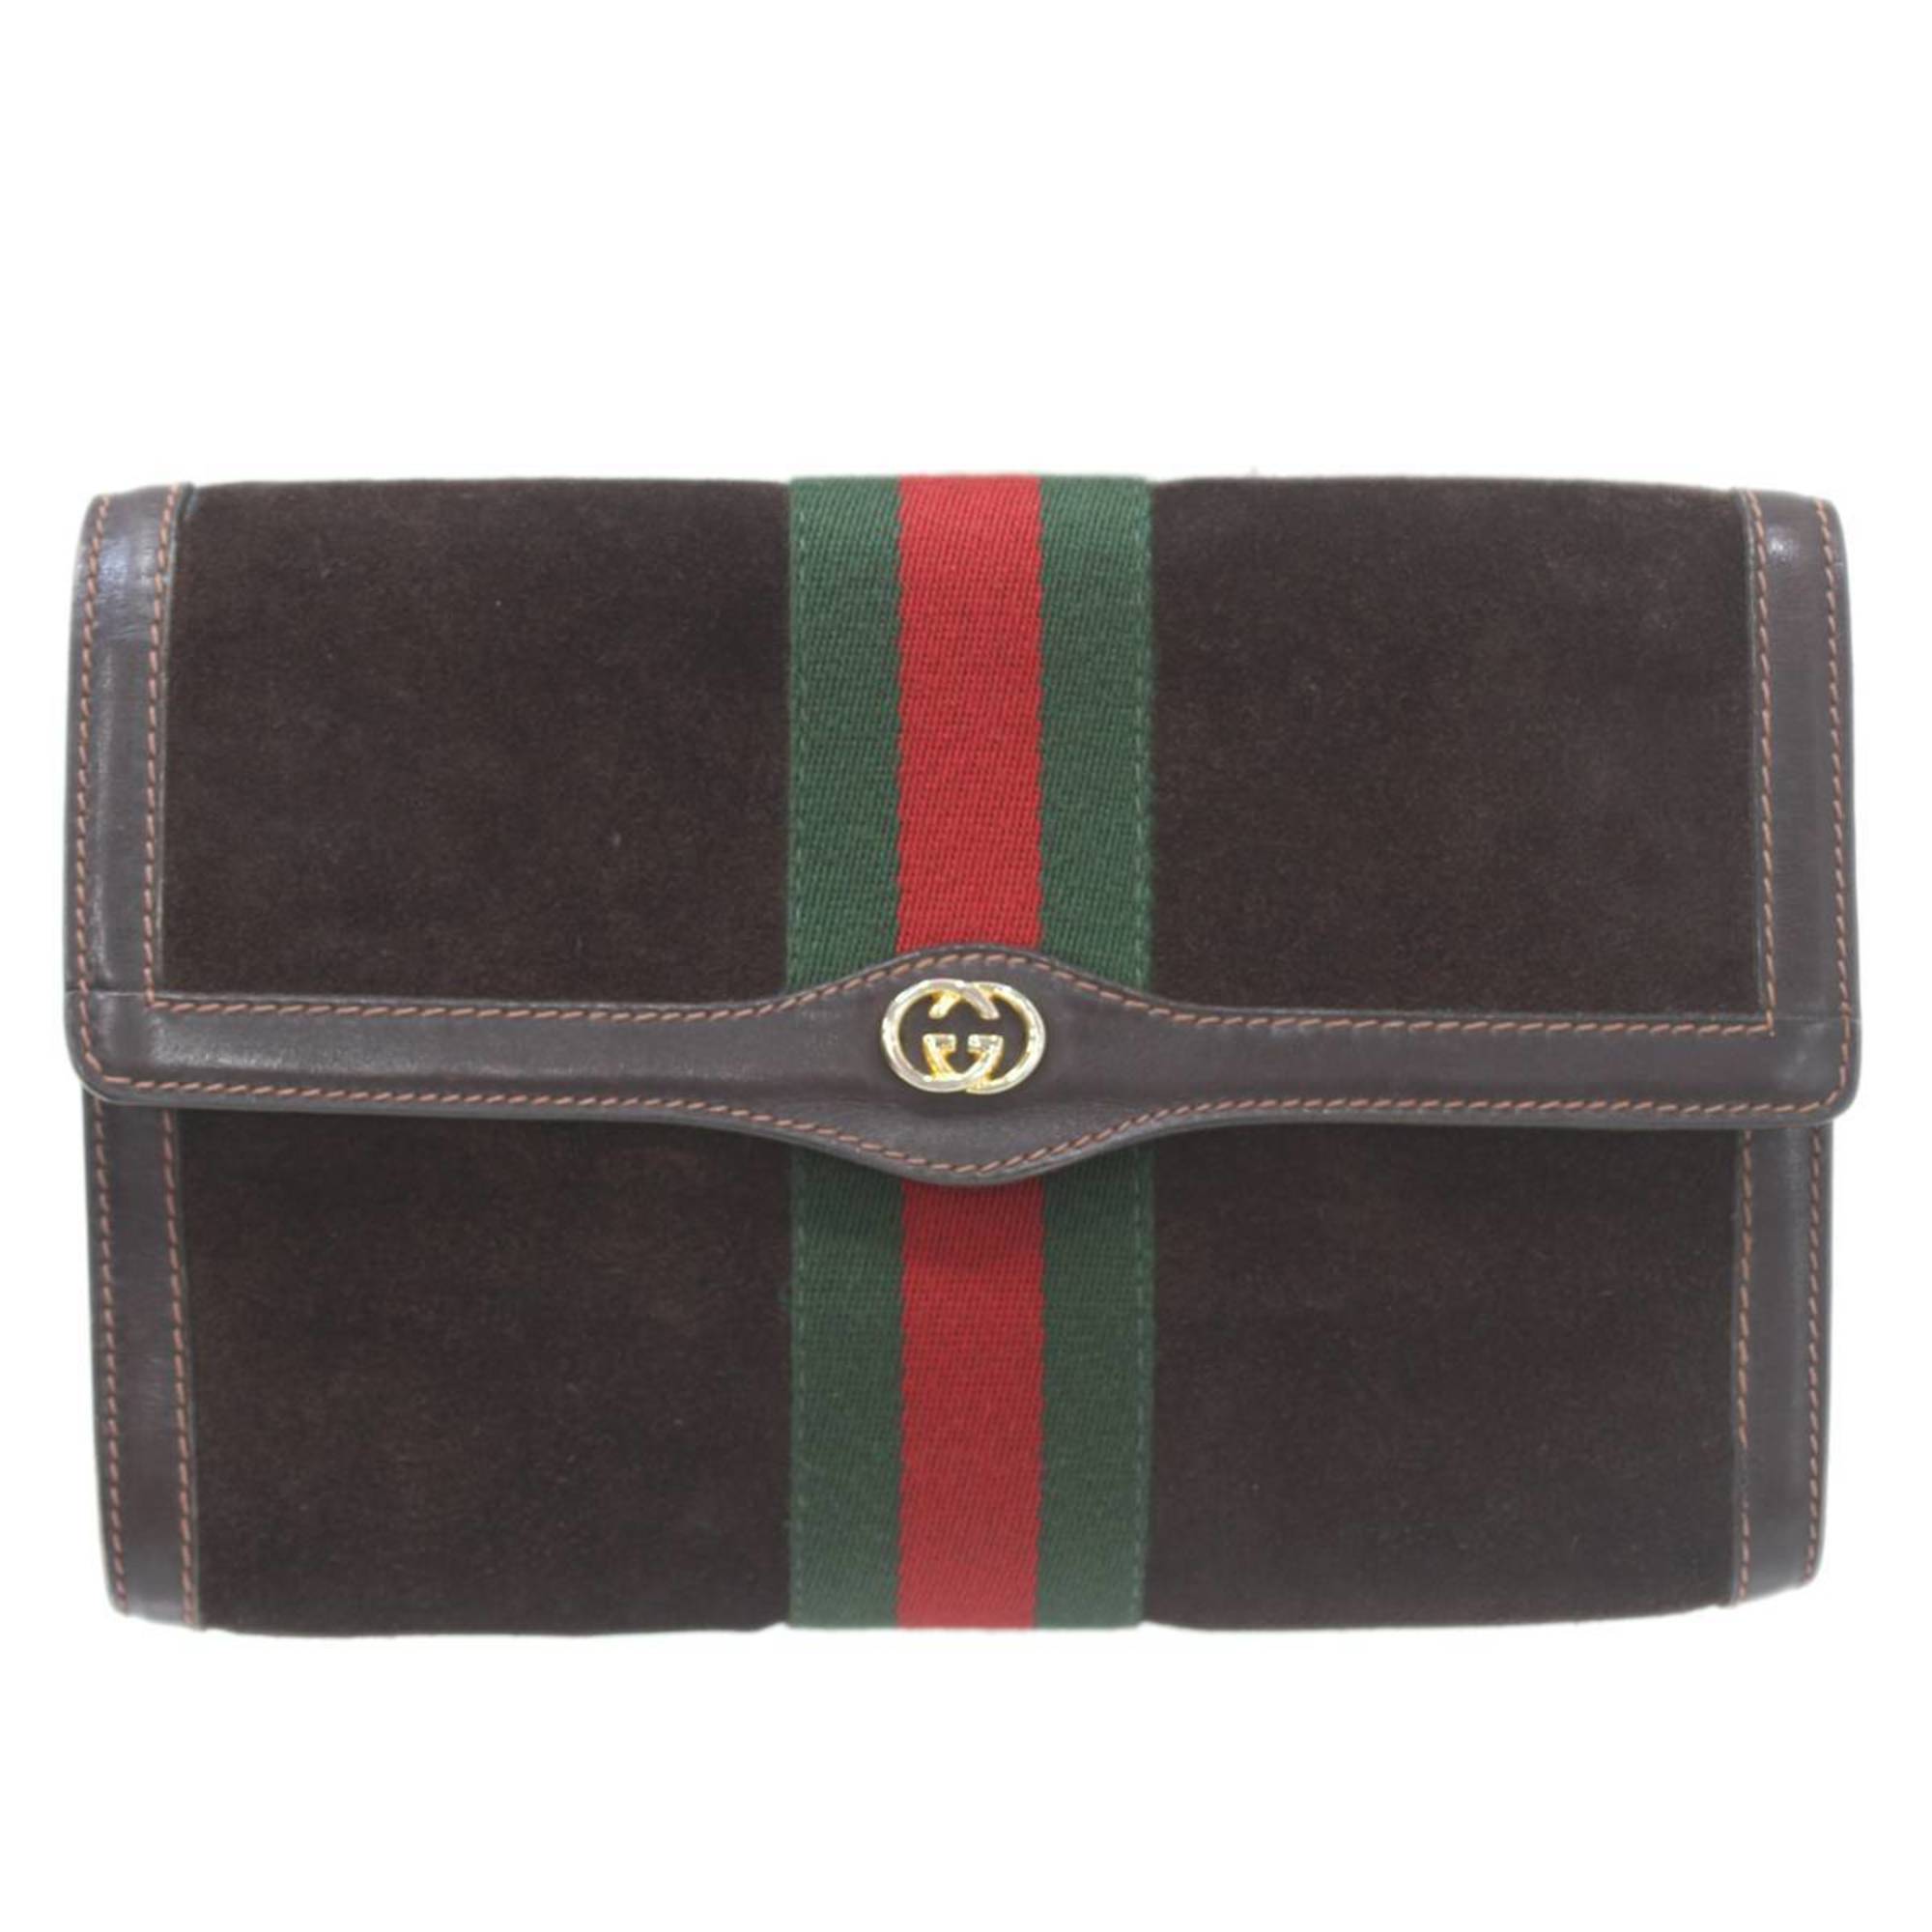 GUCCI Gucci clutch bag hand pouch second brown